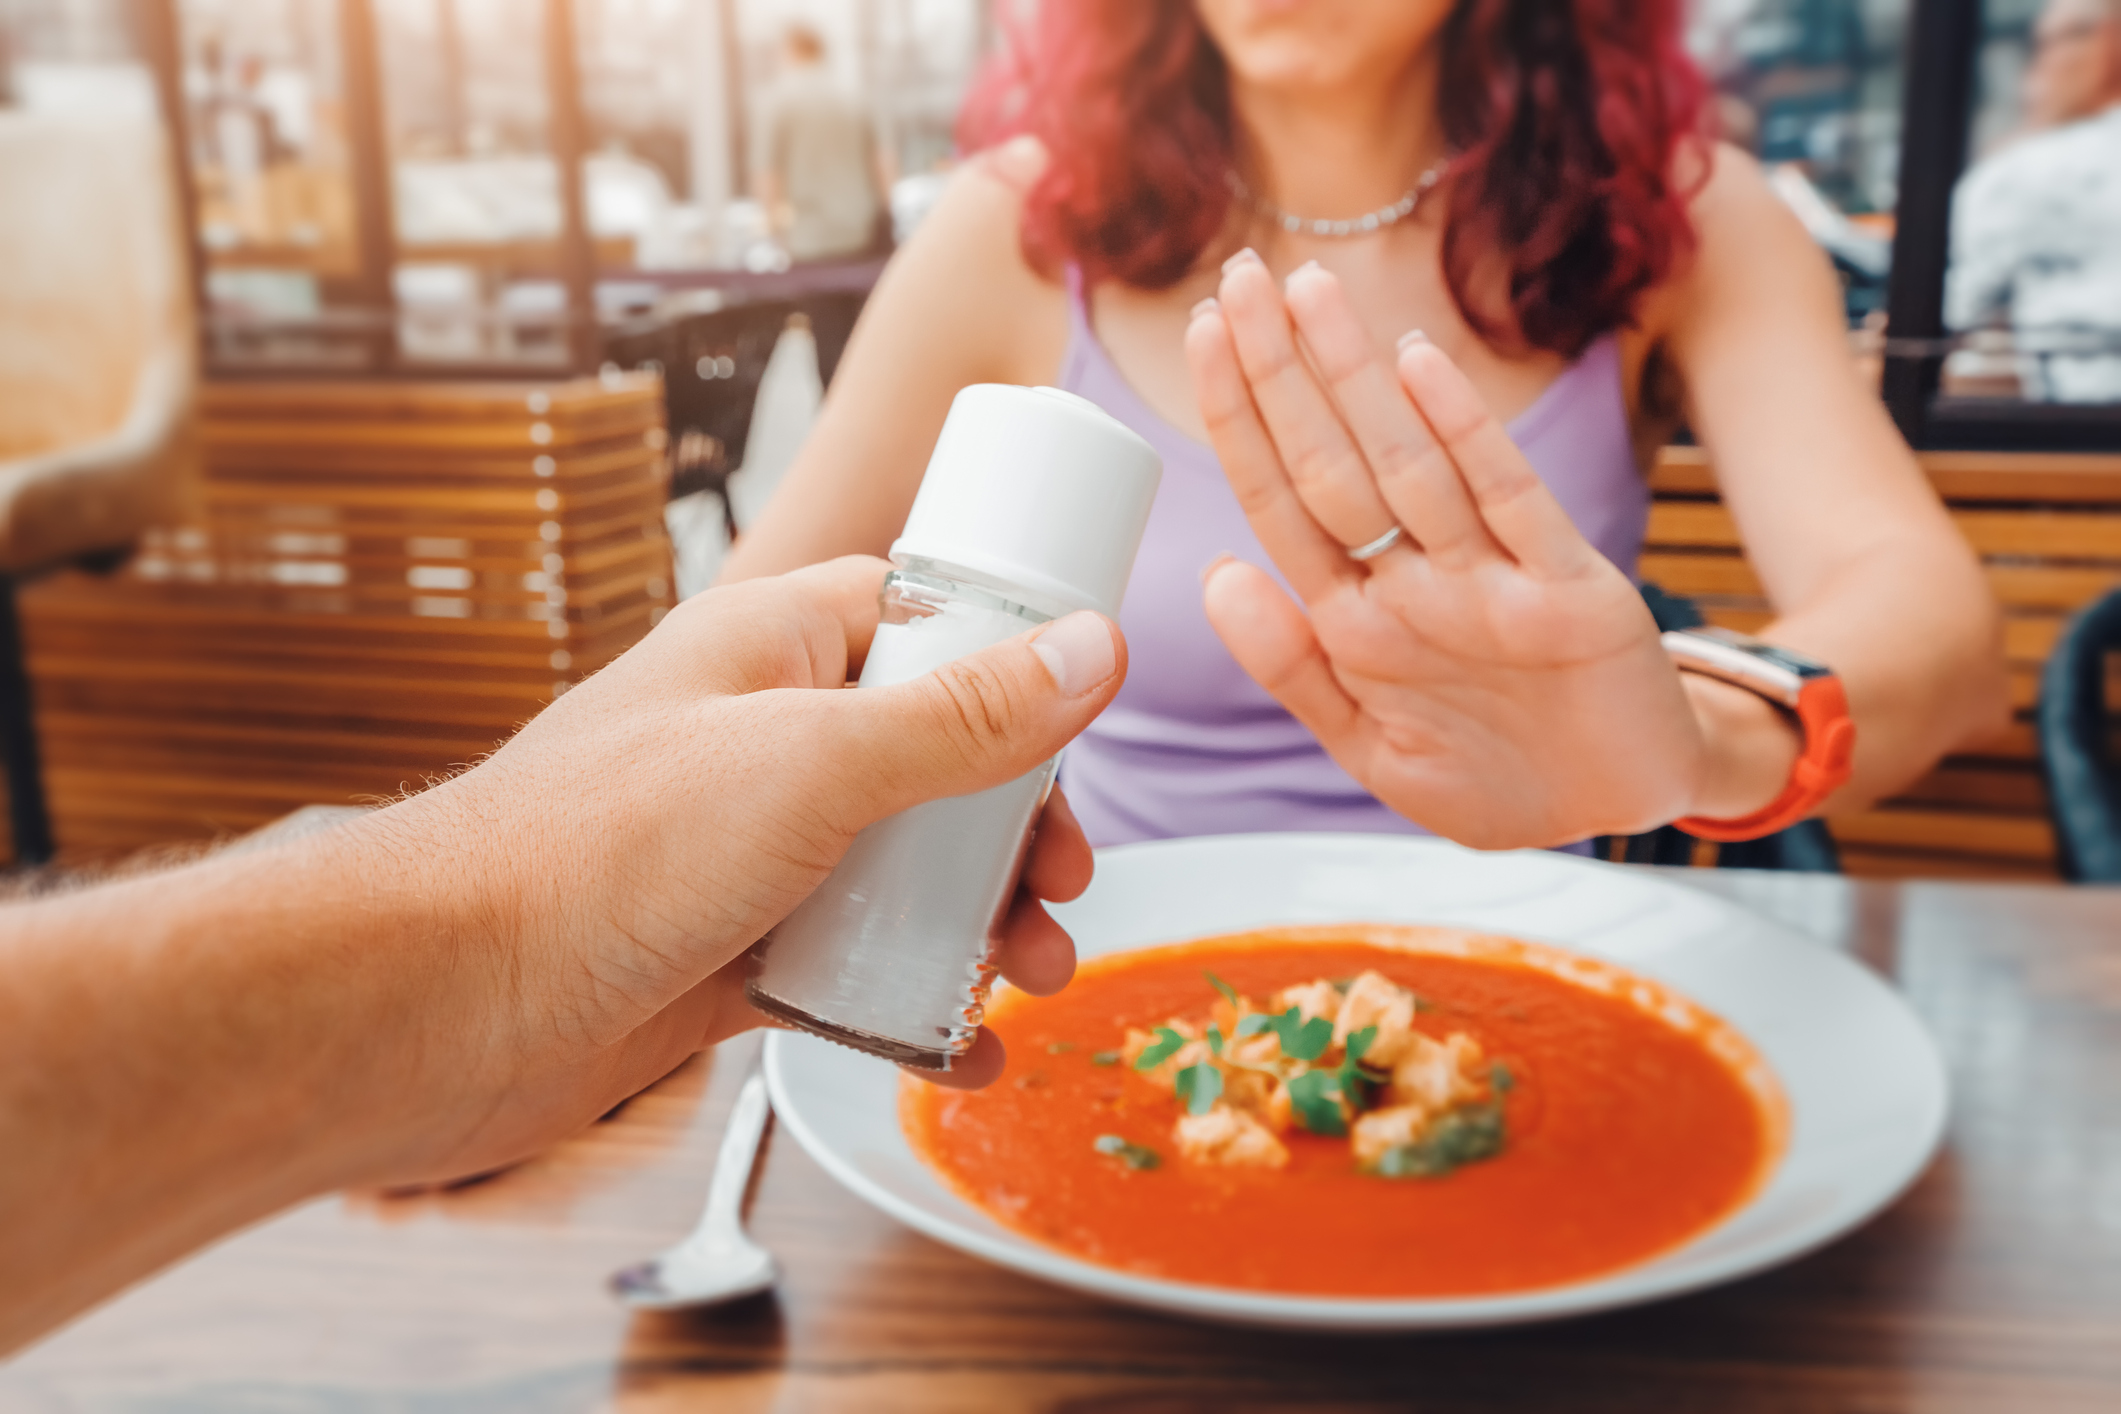 The sneaky way salt can lead to diabetes